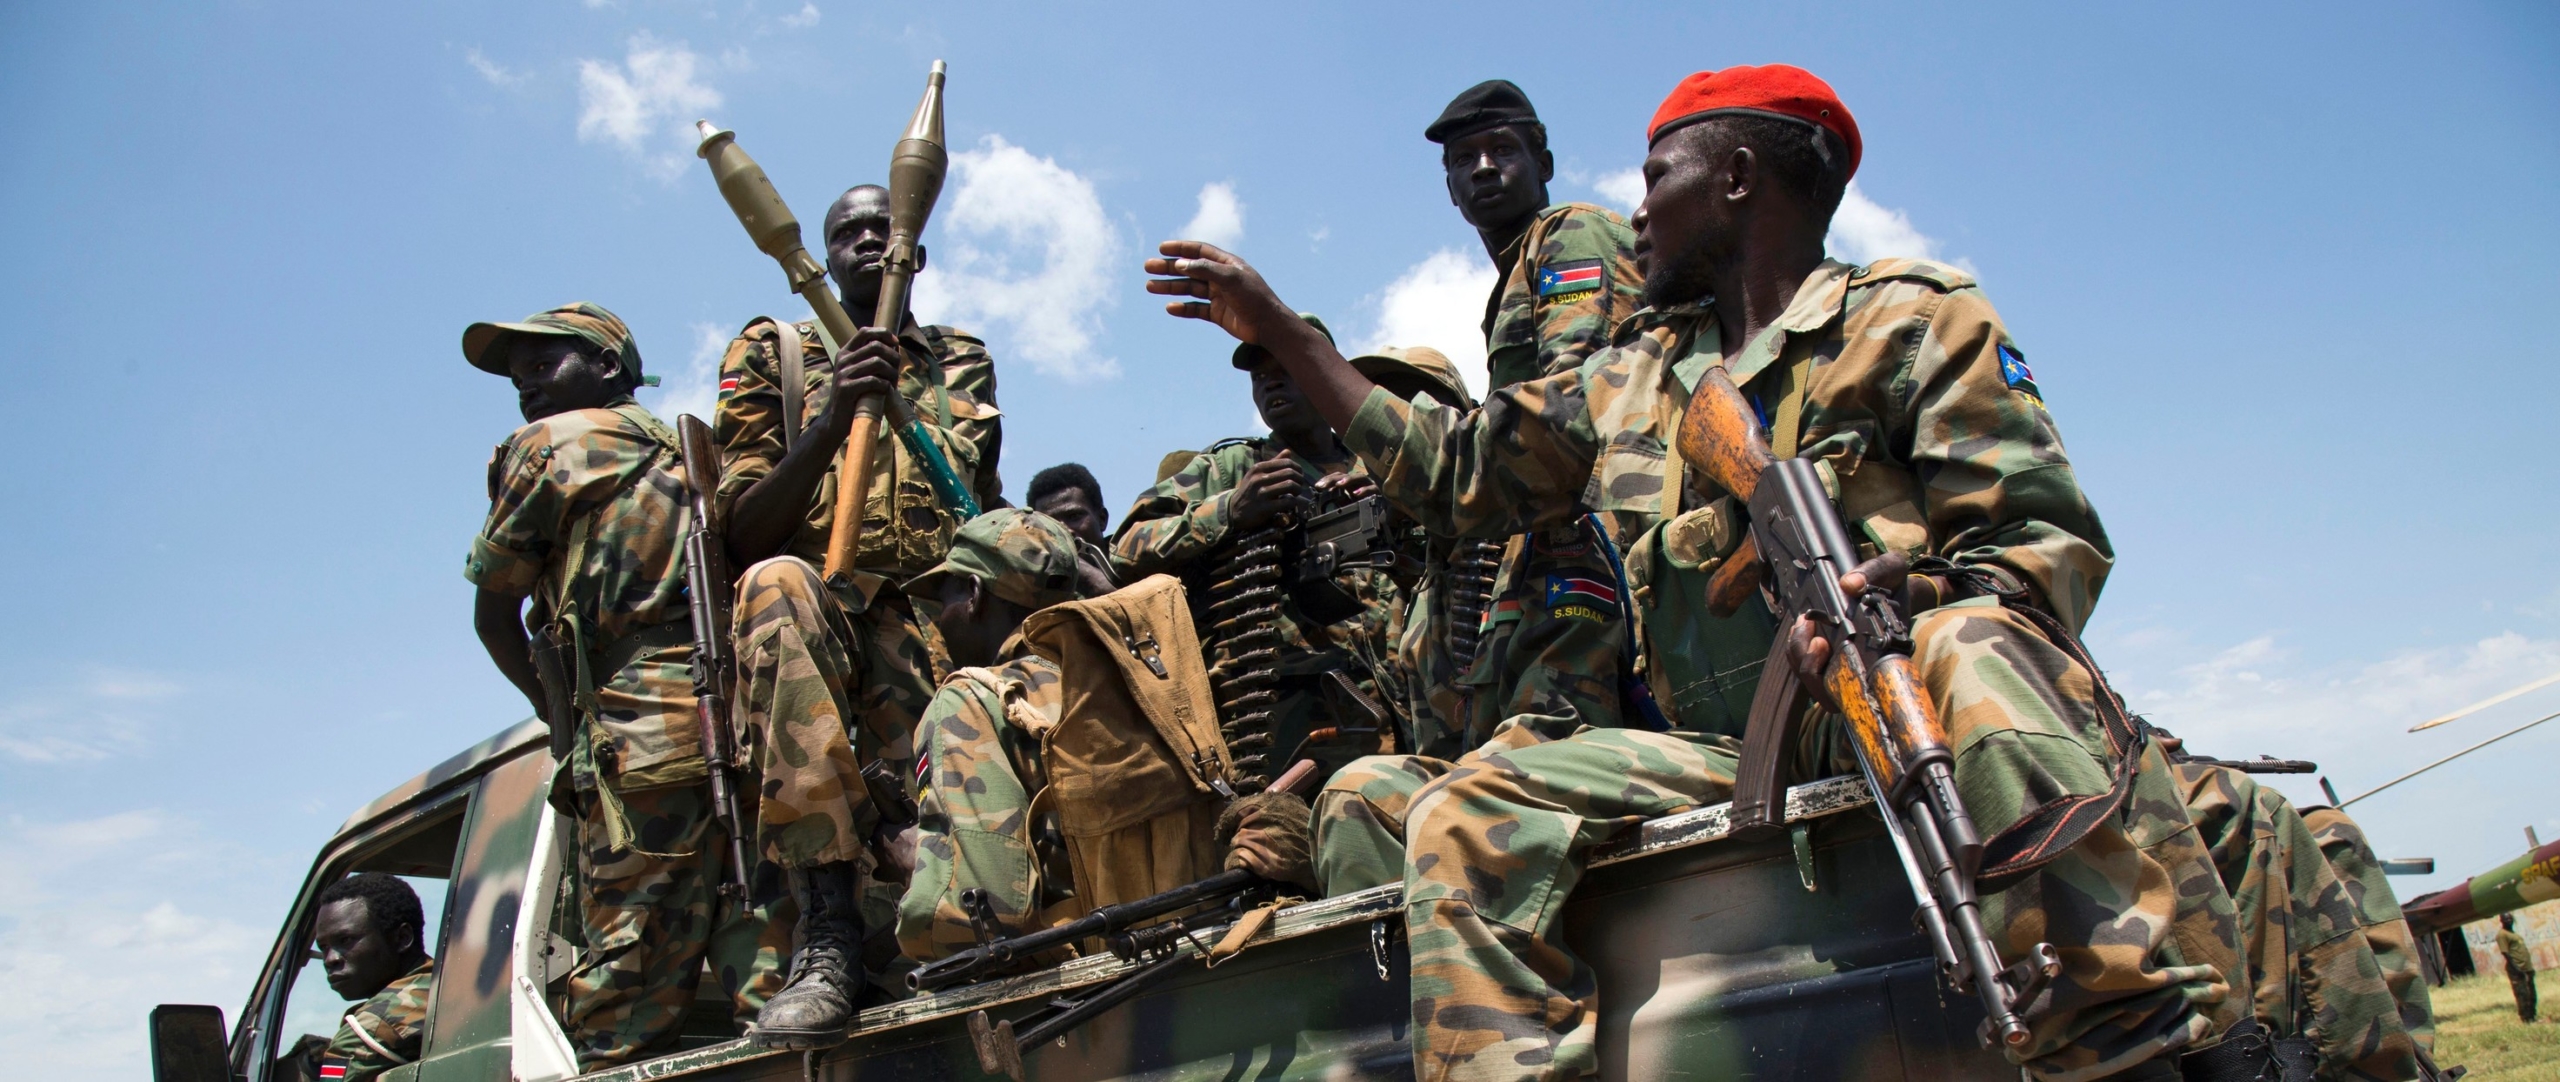 South Sudan’s conflicts are not just between communities Amnesty